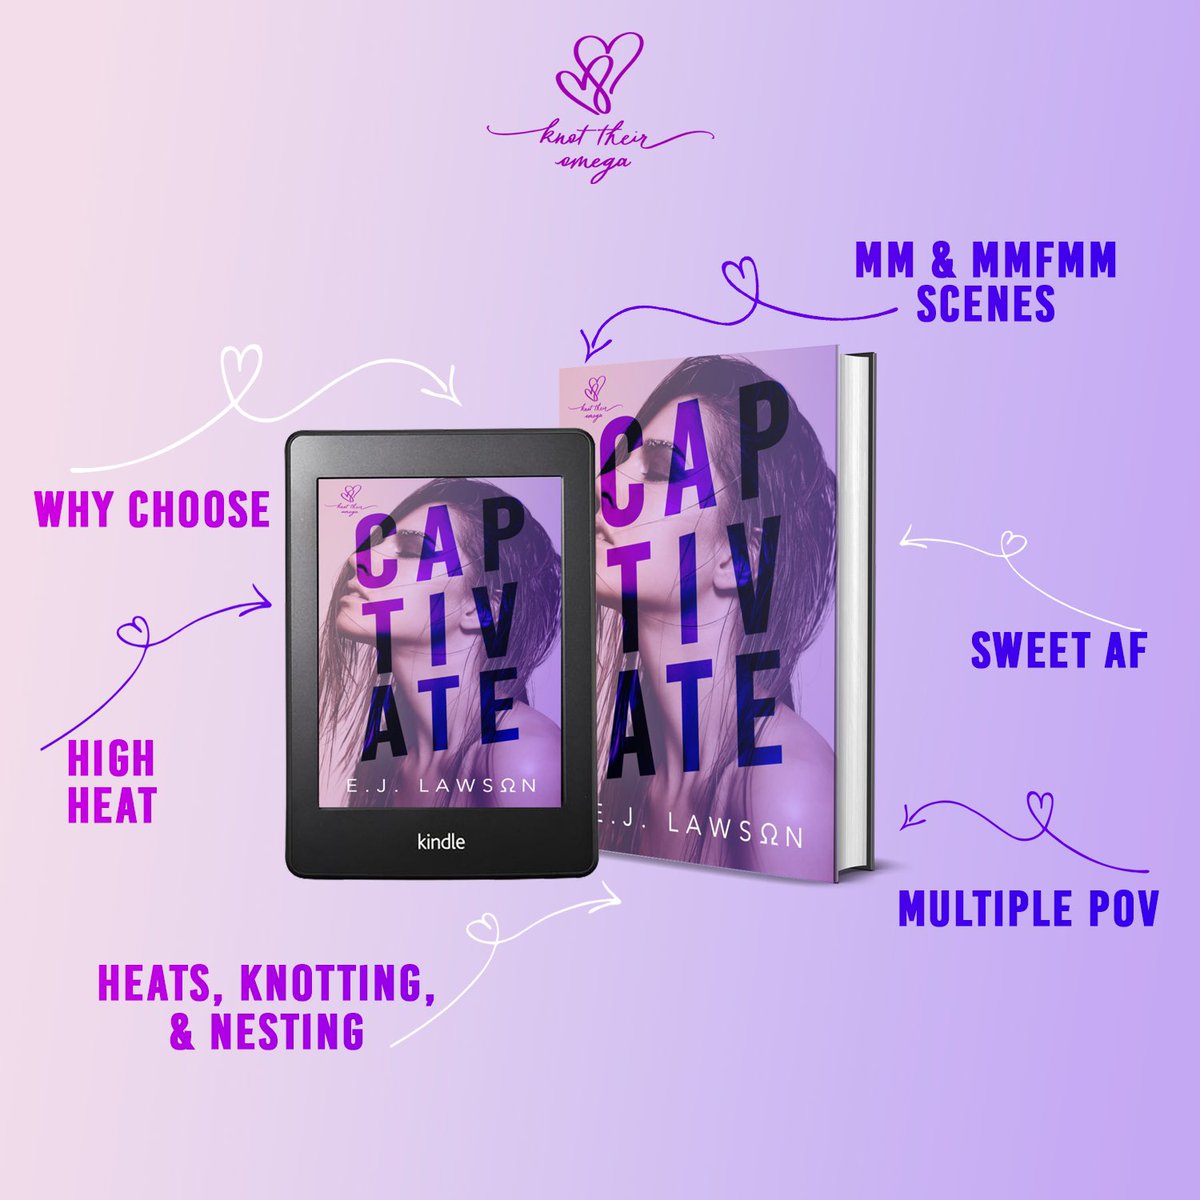 Captivate by E.J.Lawson is LIVE! A standalone romance, full of the things readers love about omegaverse: heats, knots, nesting, adorable mating moments, and steam galore! 
❤️ Available on KU: bit.ly/KnotTheirOmega1 
#omegaverse #whychooseromance #alphalove #omegaverseromance